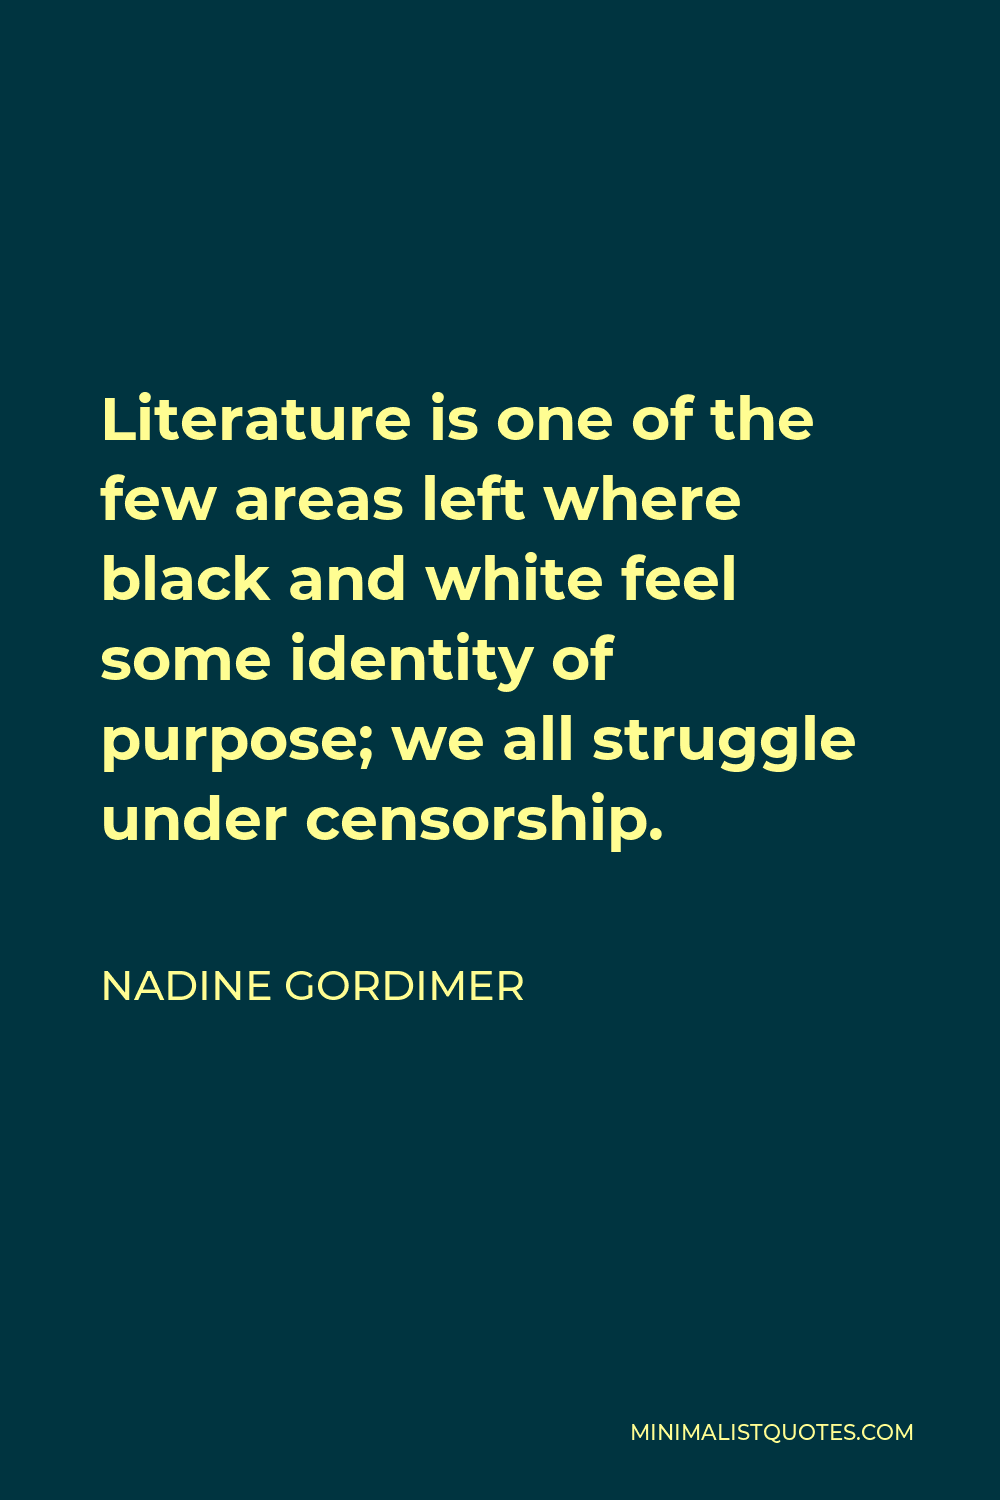 Nadine Gordimer Quote - Literature is one of the few areas left where black and white feel some identity of purpose; we all struggle under censorship.